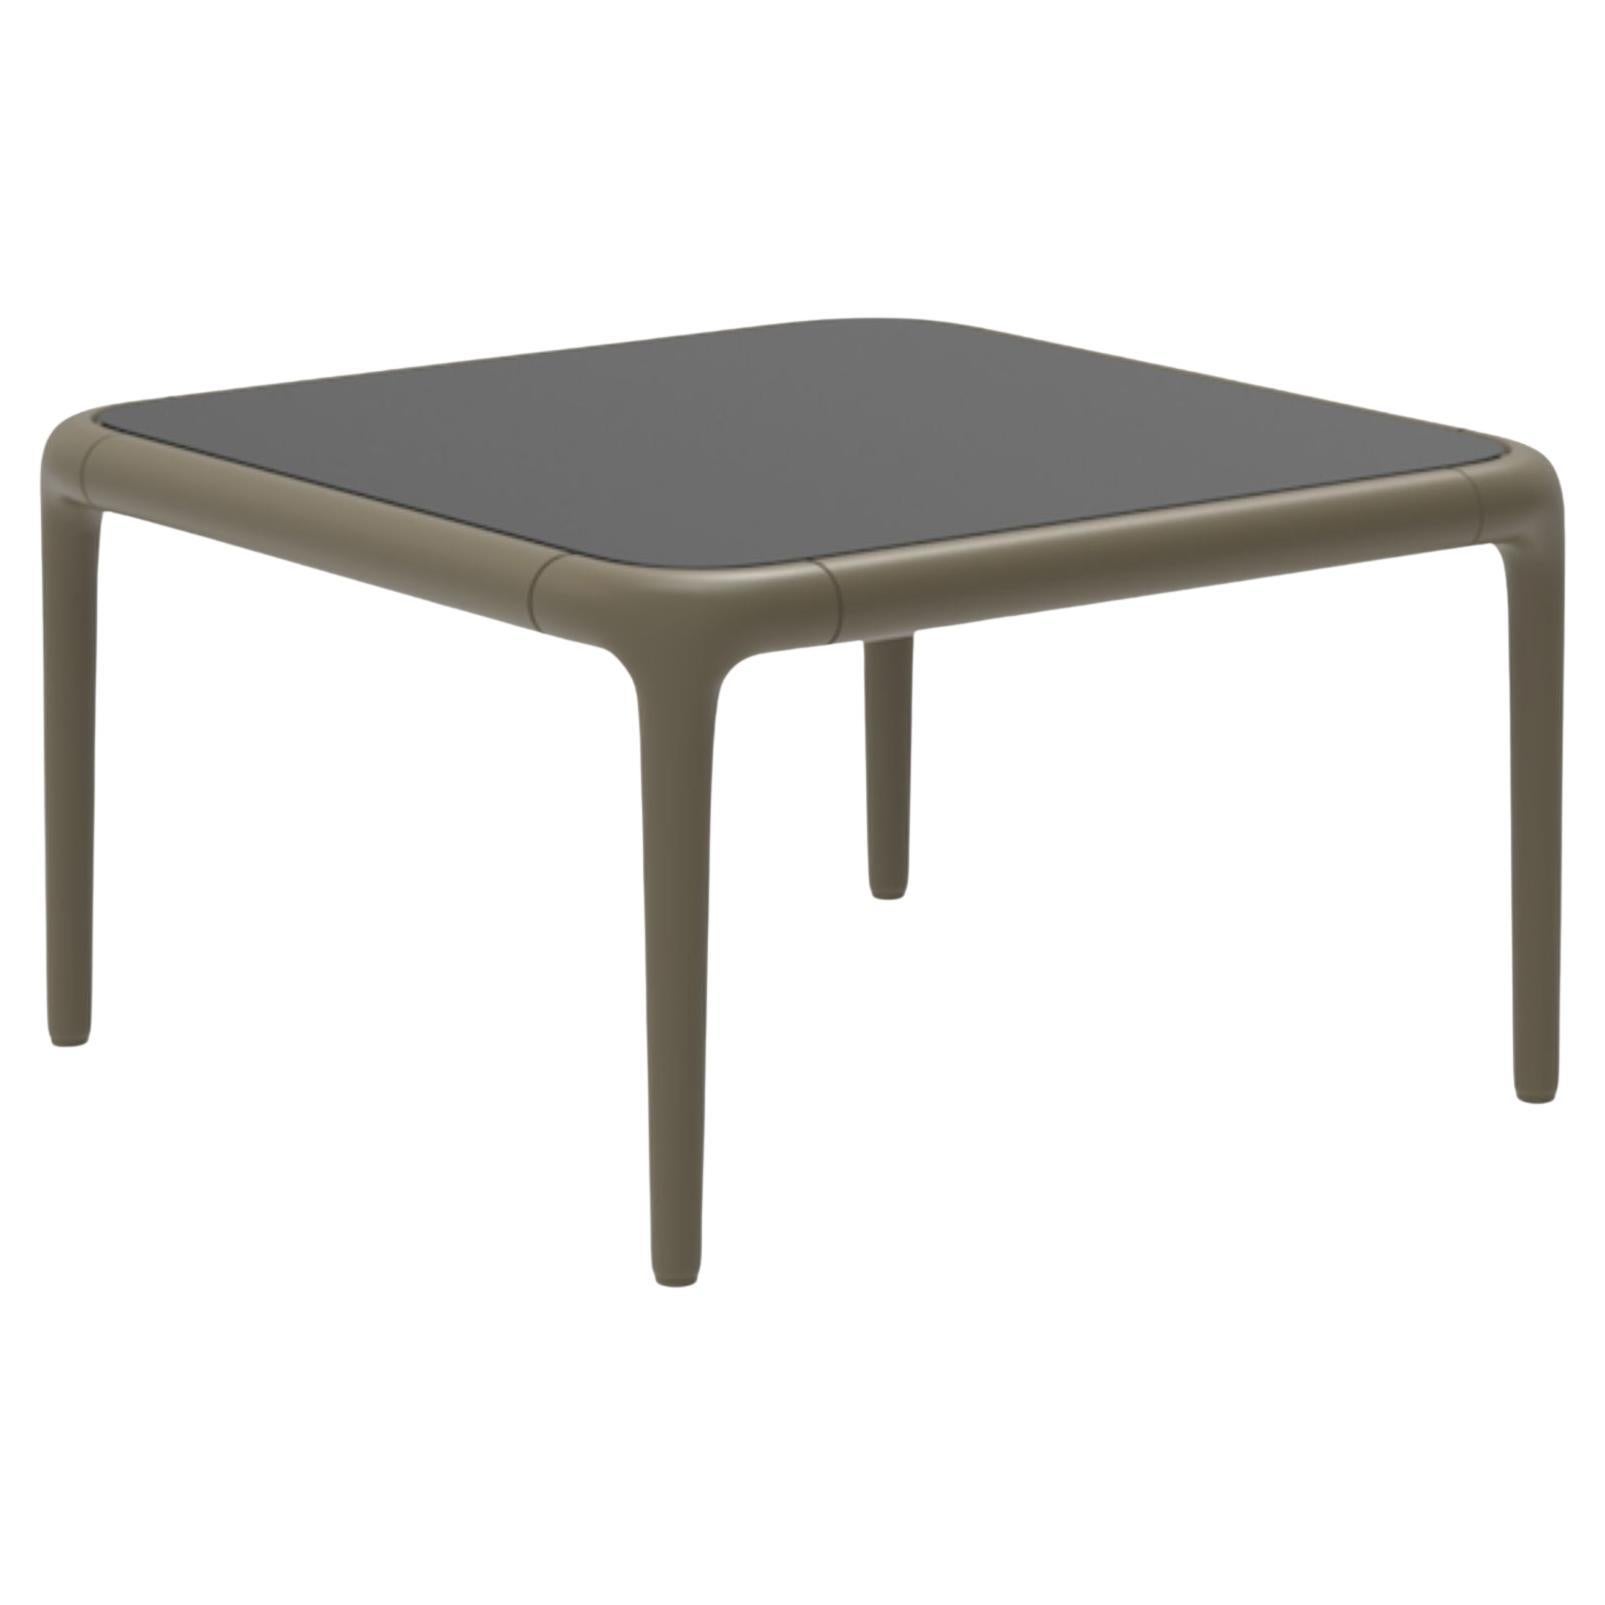 Xaloc Bronze Coffee Table 50 with Glass Top by Mowee